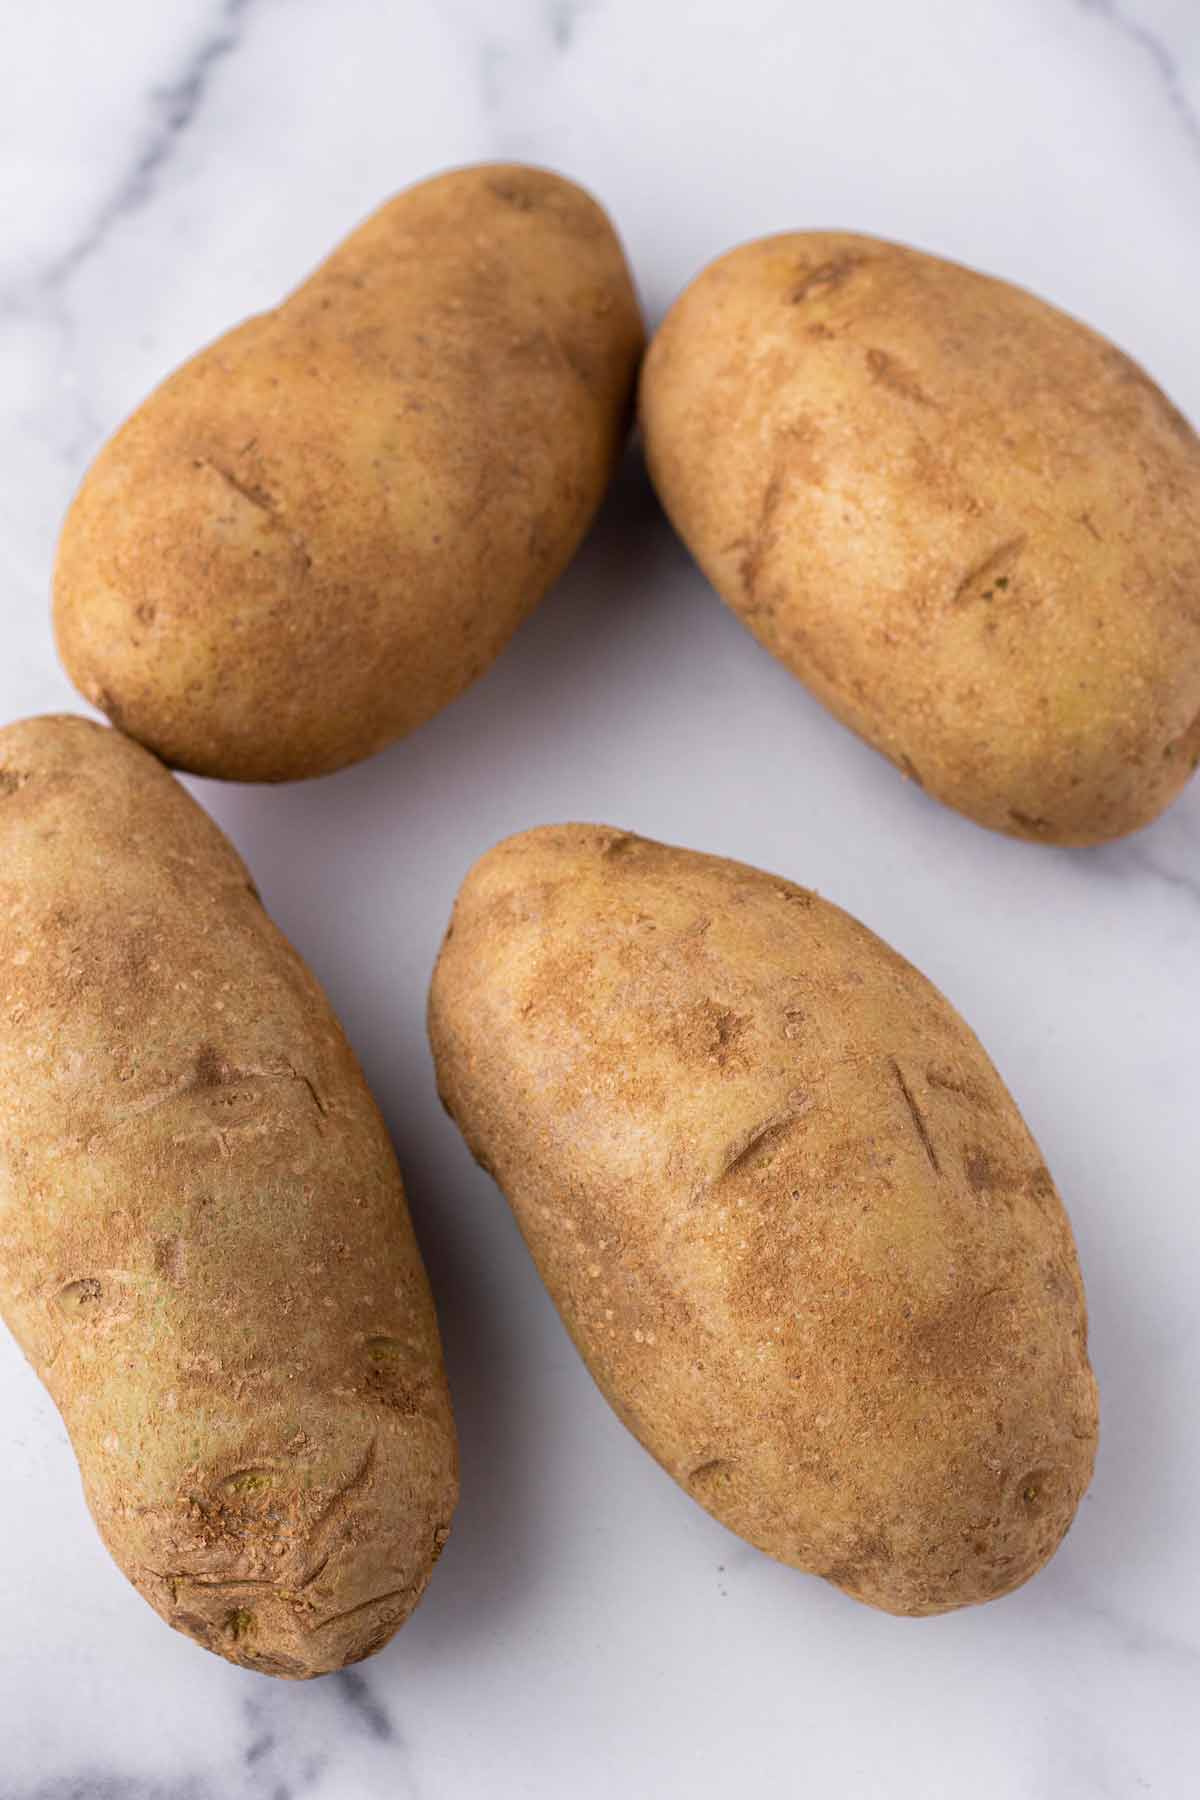 four unpeeled russet potatoes